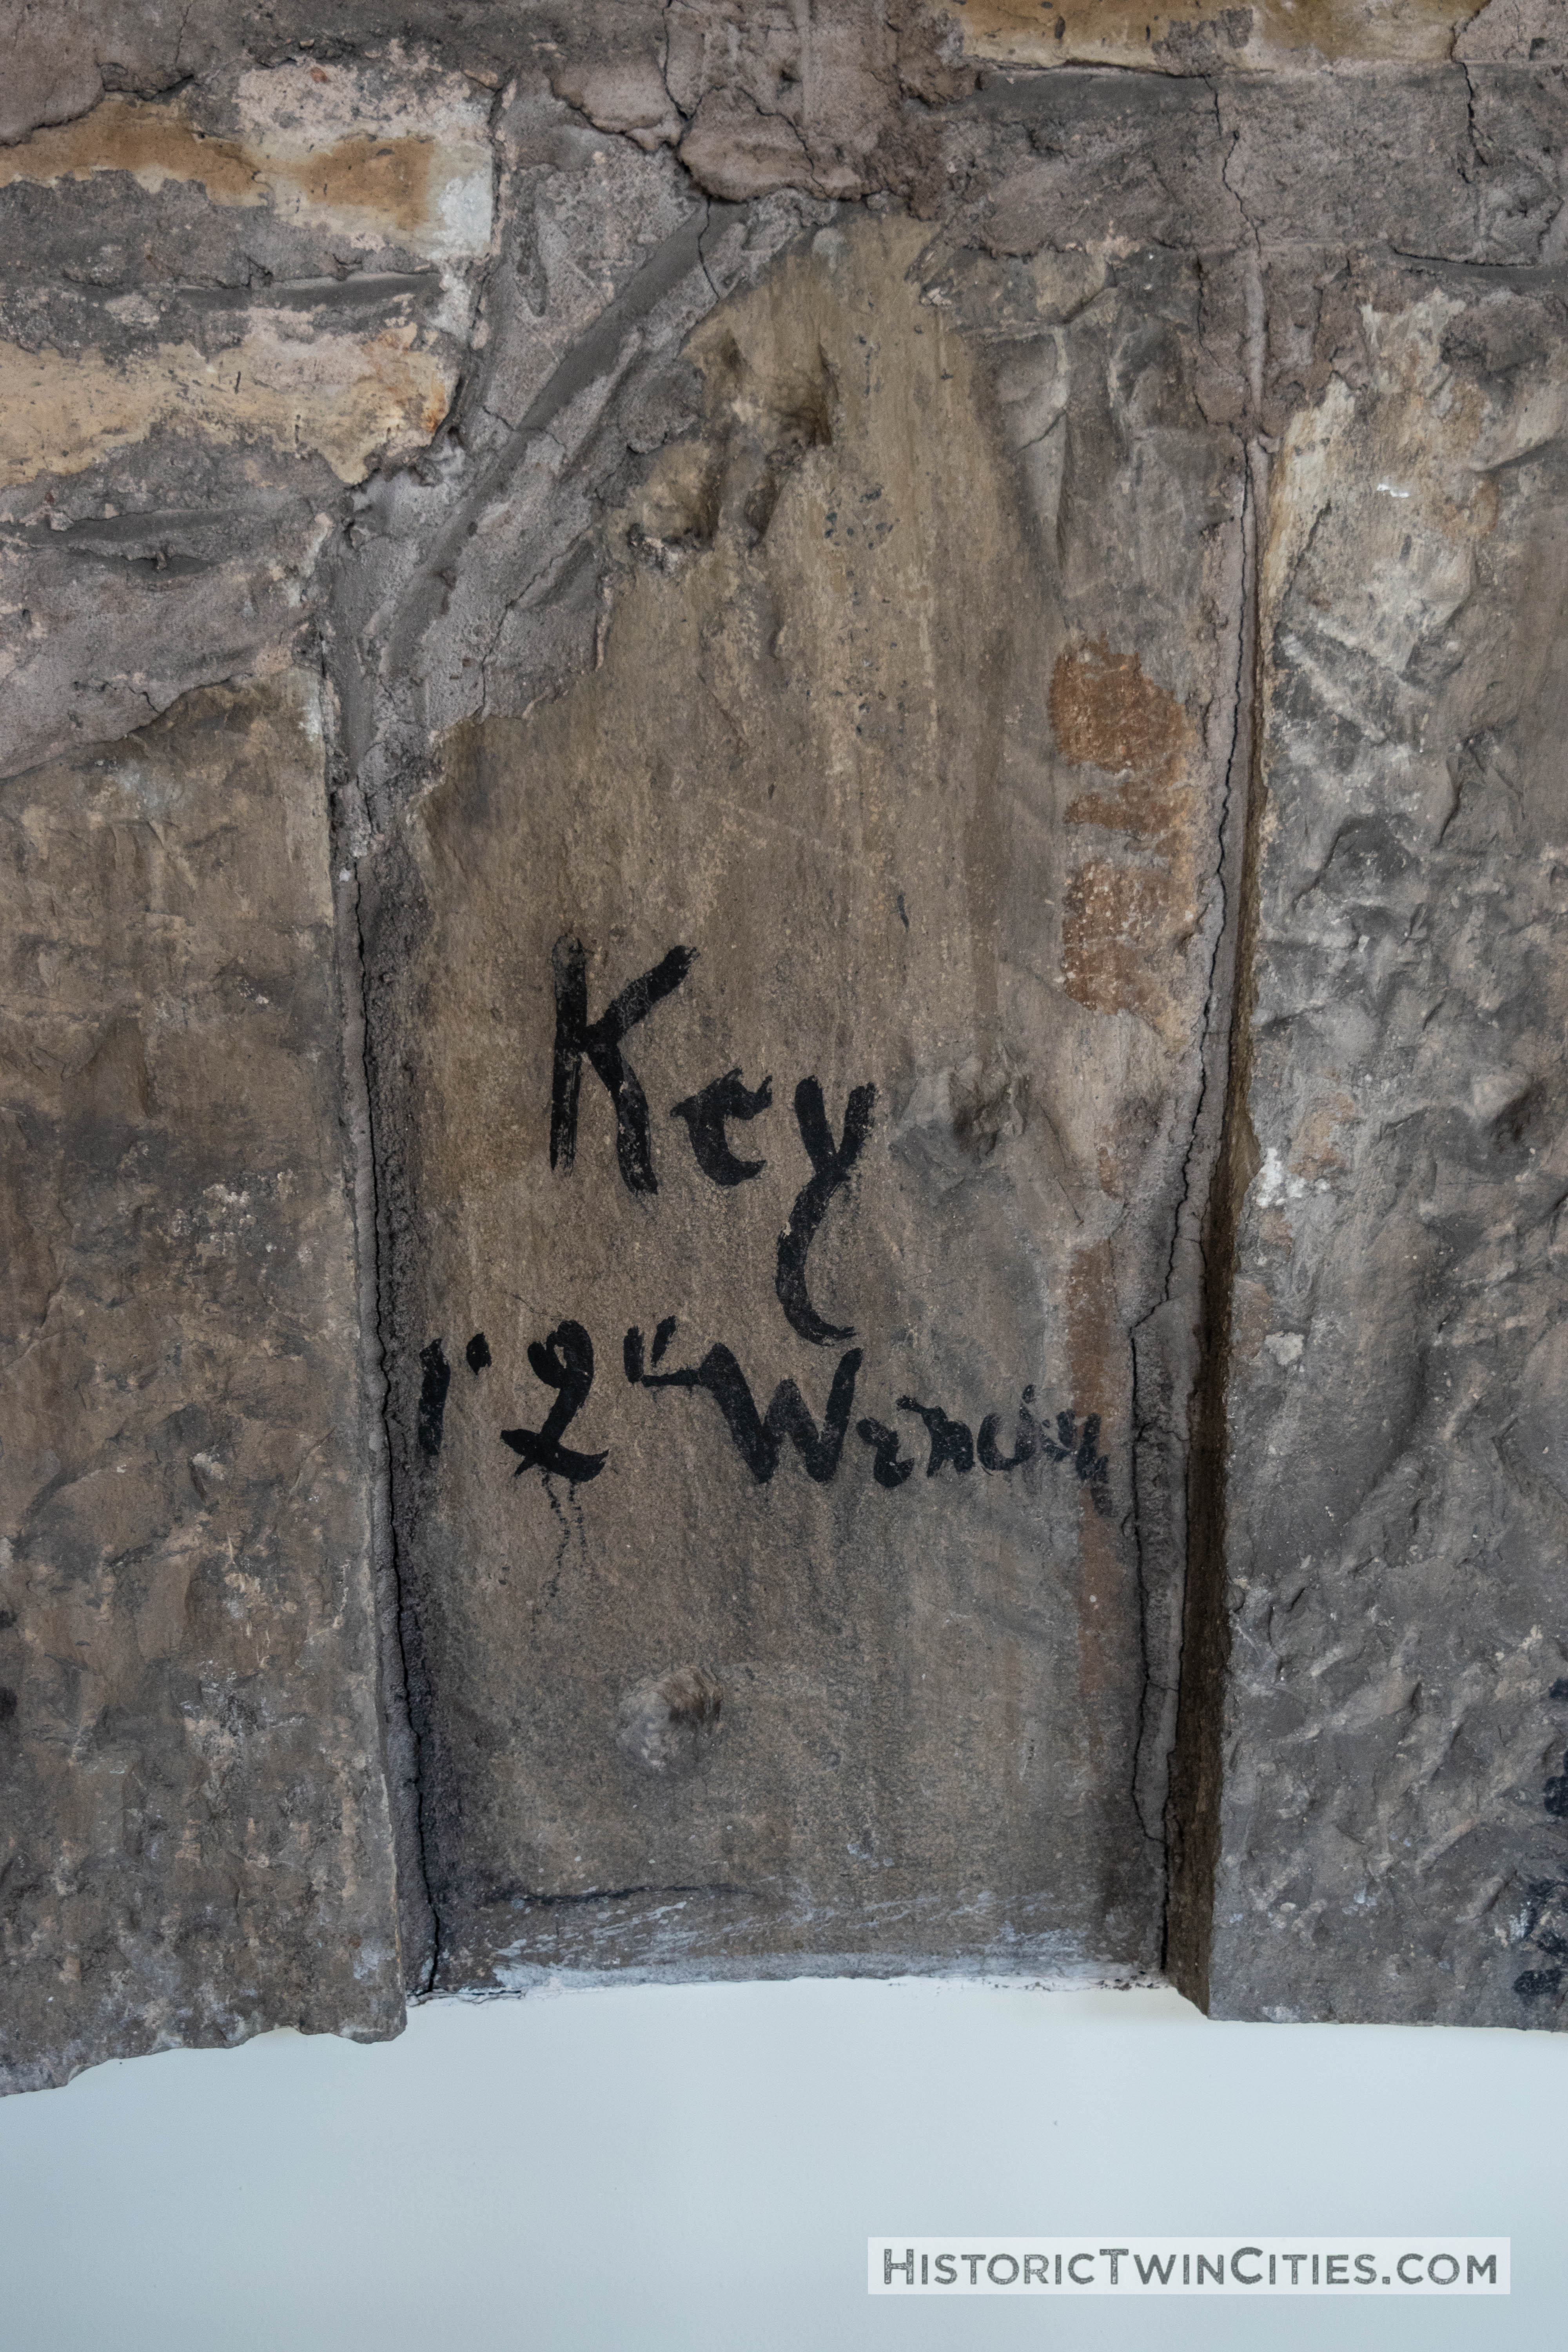 Original keystone at the peak of an arch on the ground level featuring the original quarry markings